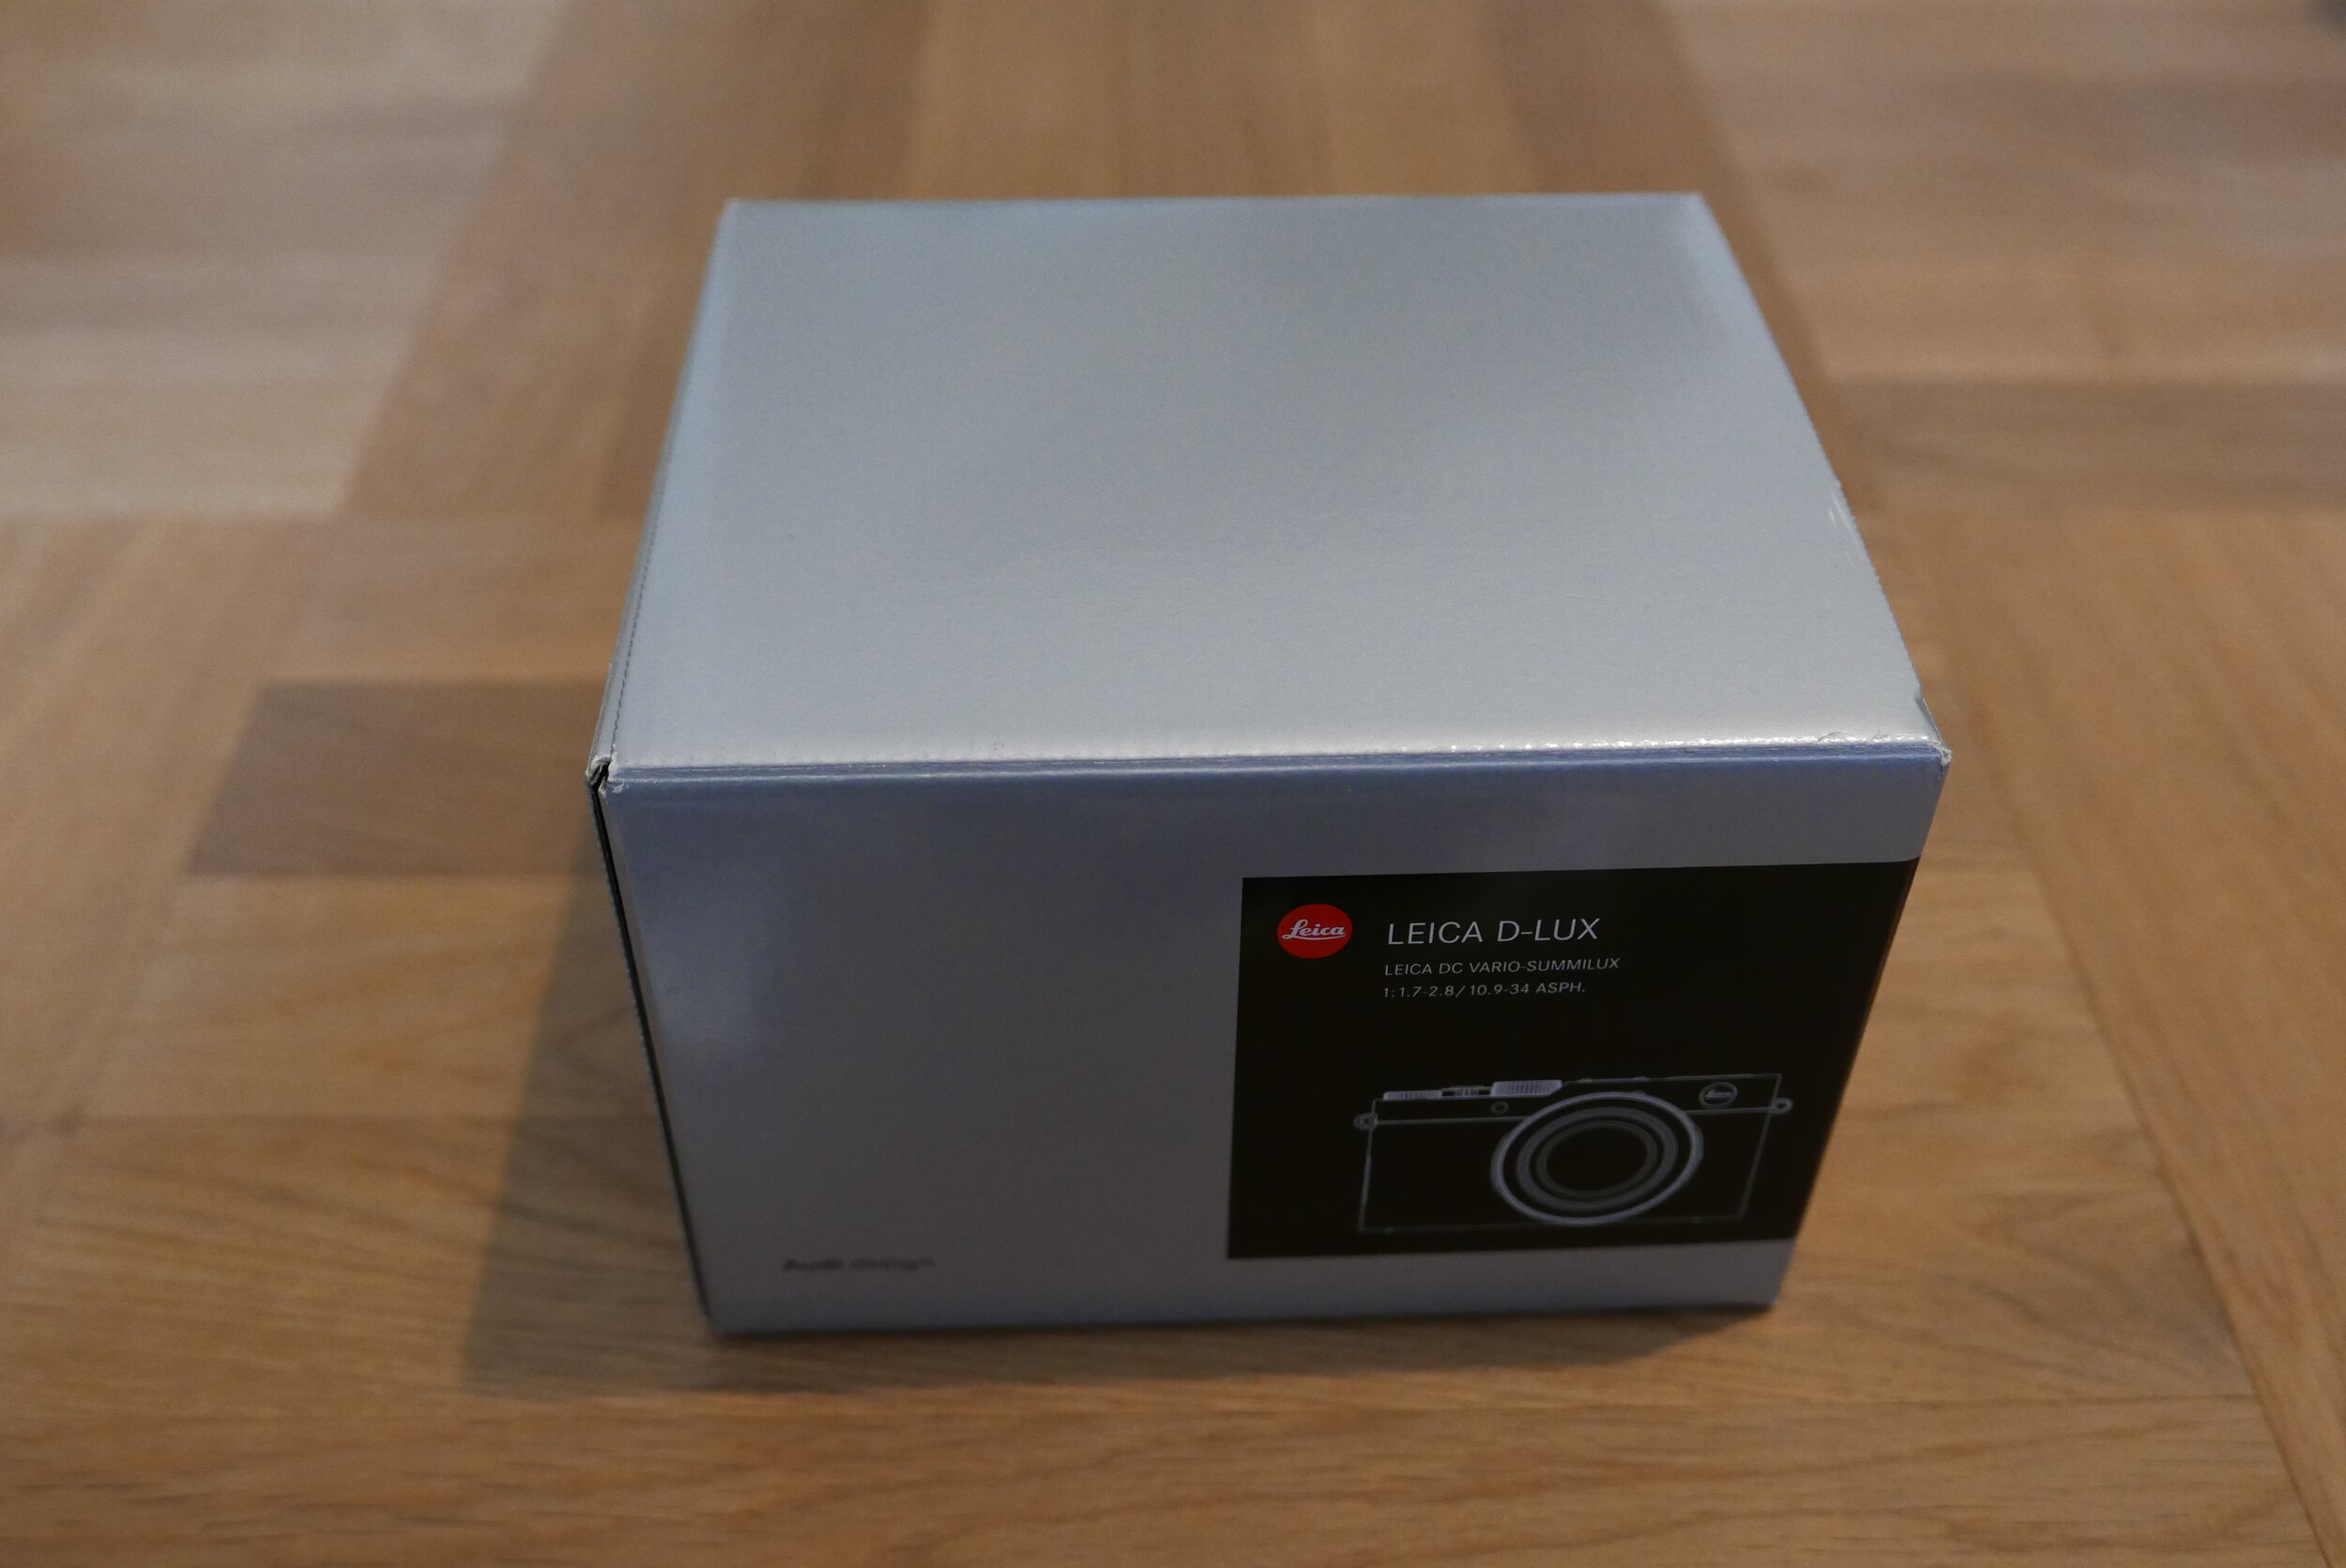 Is Leica D-lux (Typ109) worth it in 2020? Four Years With The 